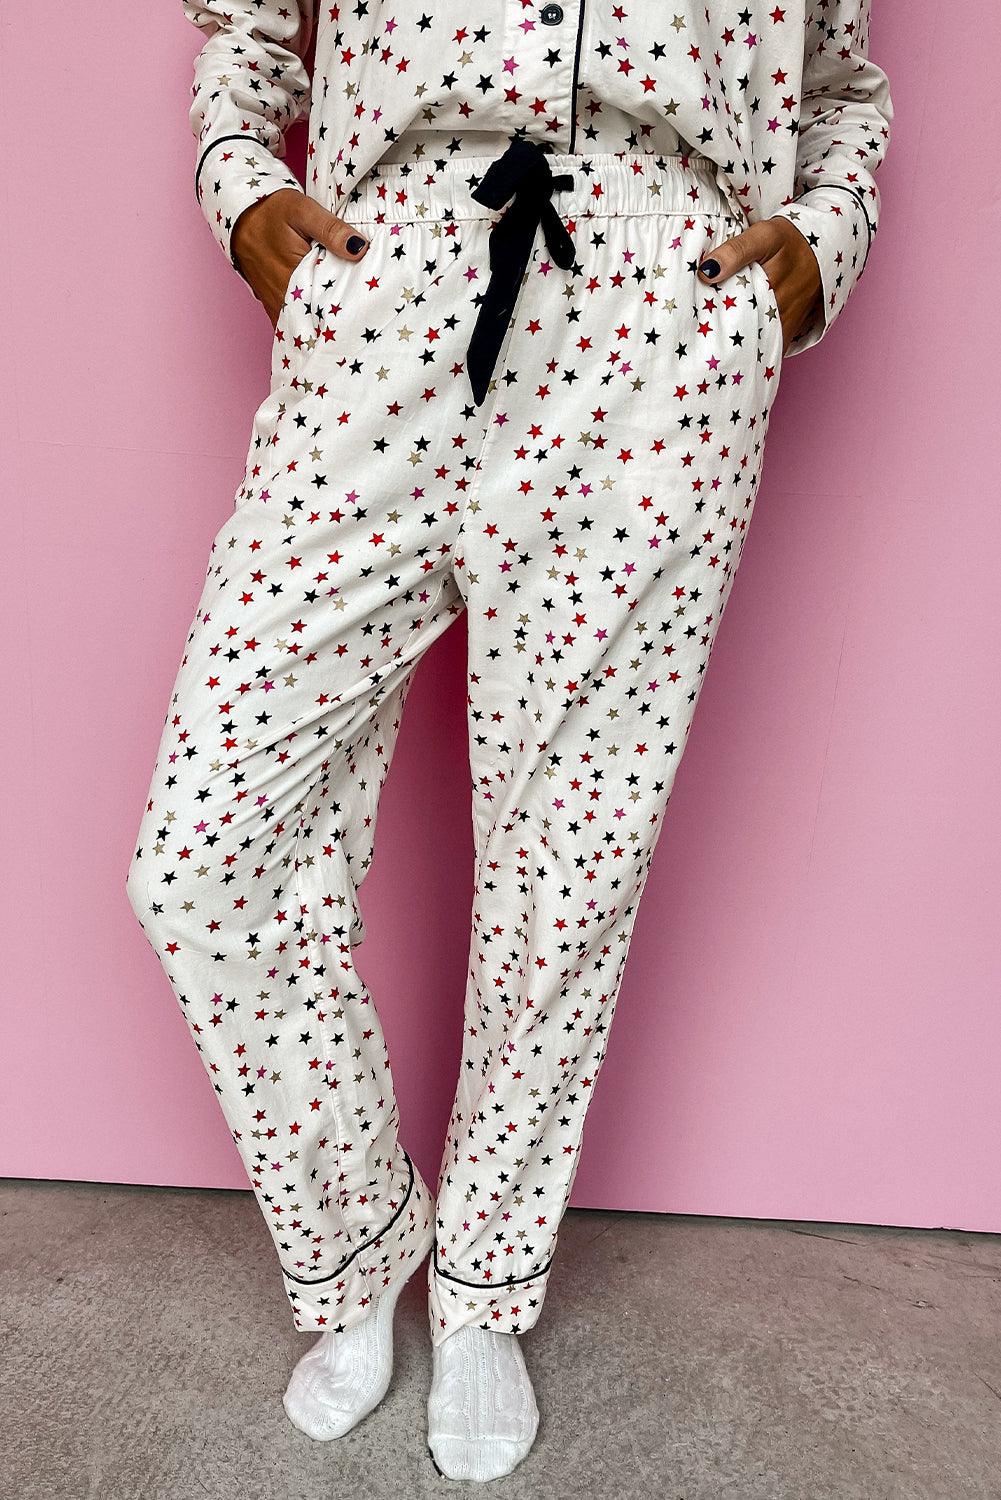 White Contrast Pipping Star Long Sleeve and Pants Pajamas Set - L & M Kee, LLC